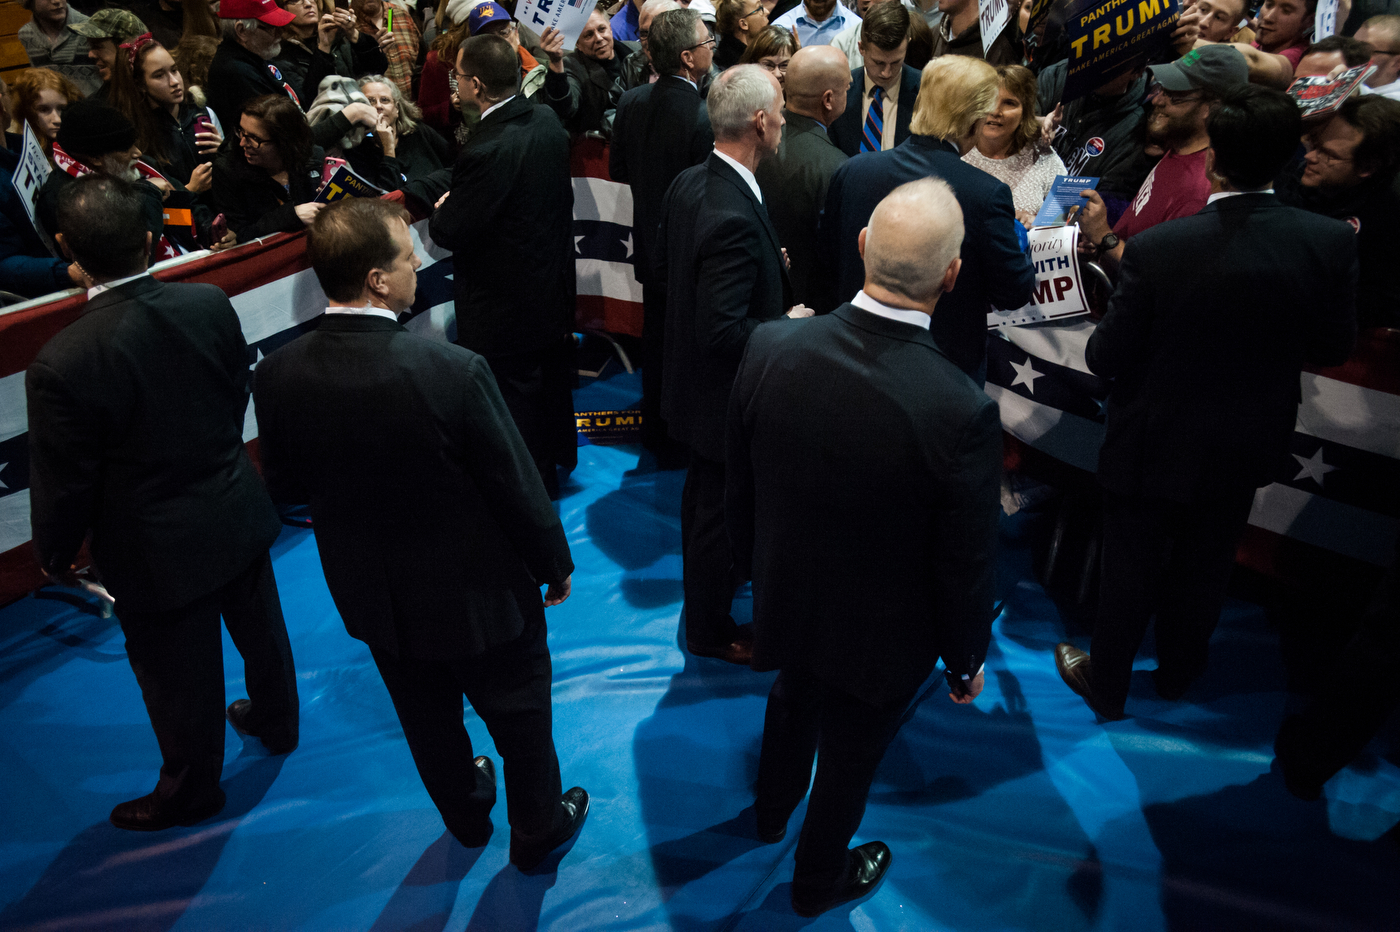  The U.S. Secret Service detail for Republican U.S. presidential candidate Donald Trump stands watch as he signs autographs at a campaign event at University of Northern Iowa in Cedar Falls, Iowa on January 12, 2016.  